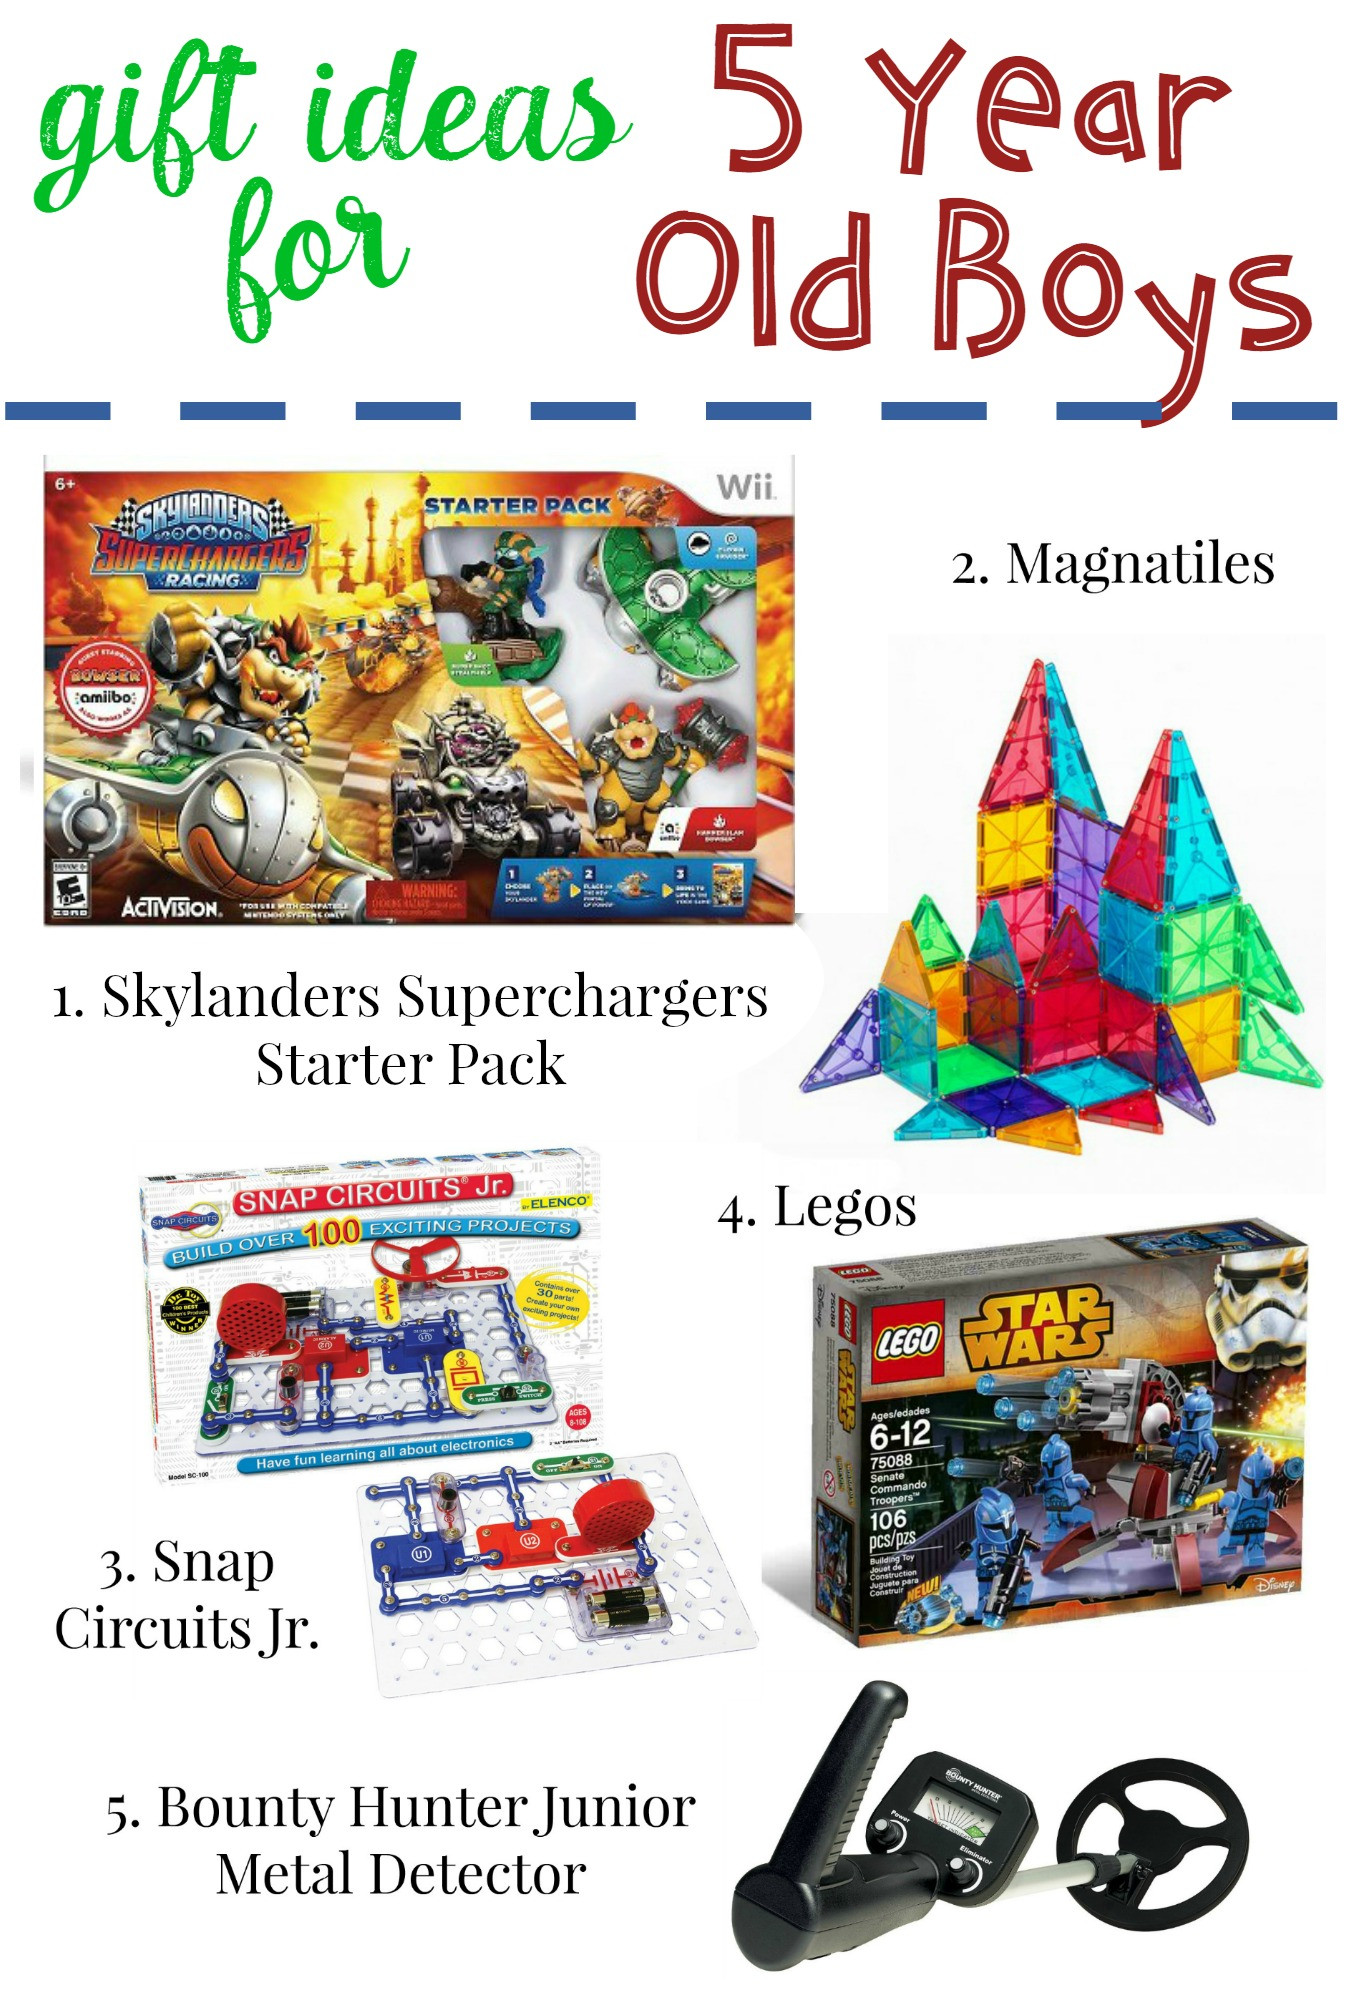 5 Year Old Christmas Gift Ideas
 Gifts for 5 Year Old Boys